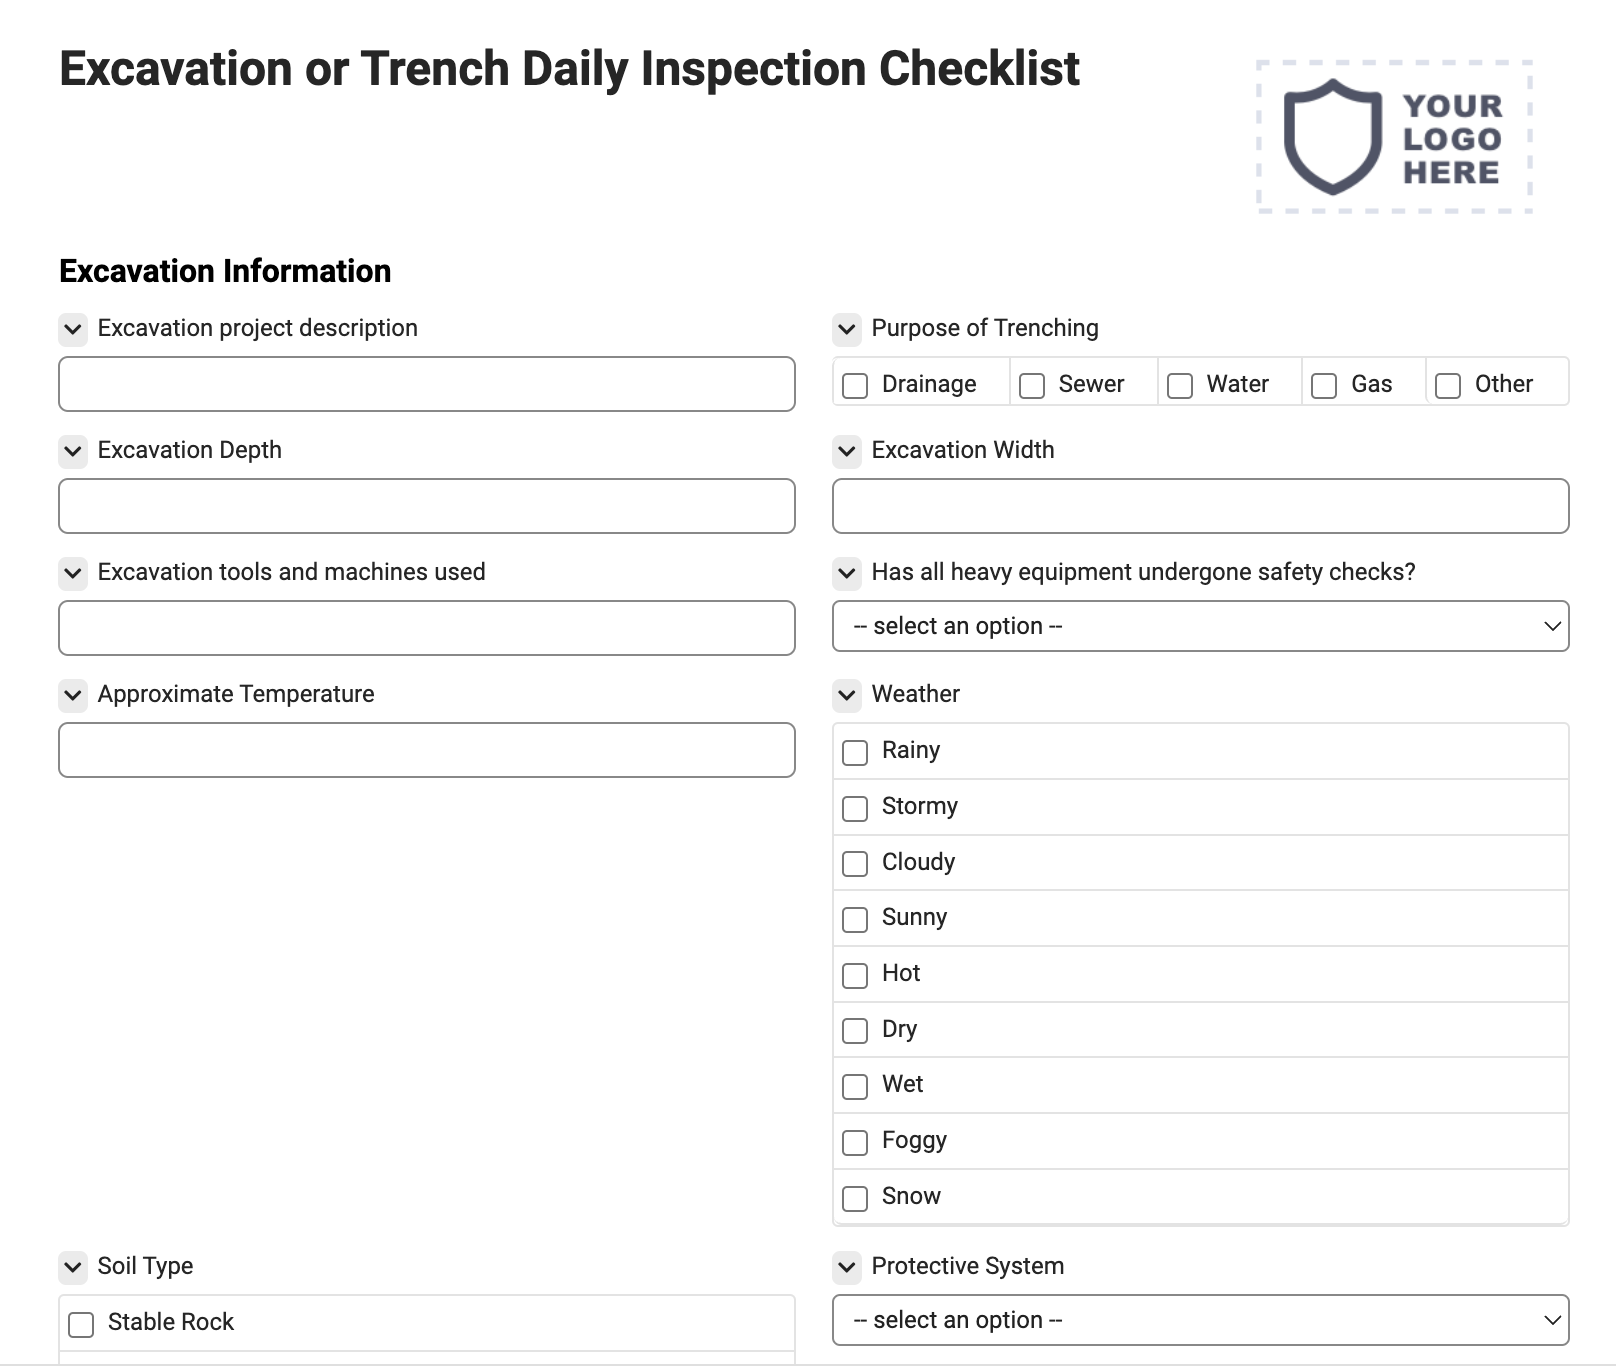 Excavation or Trench Daily Inspection Checklist